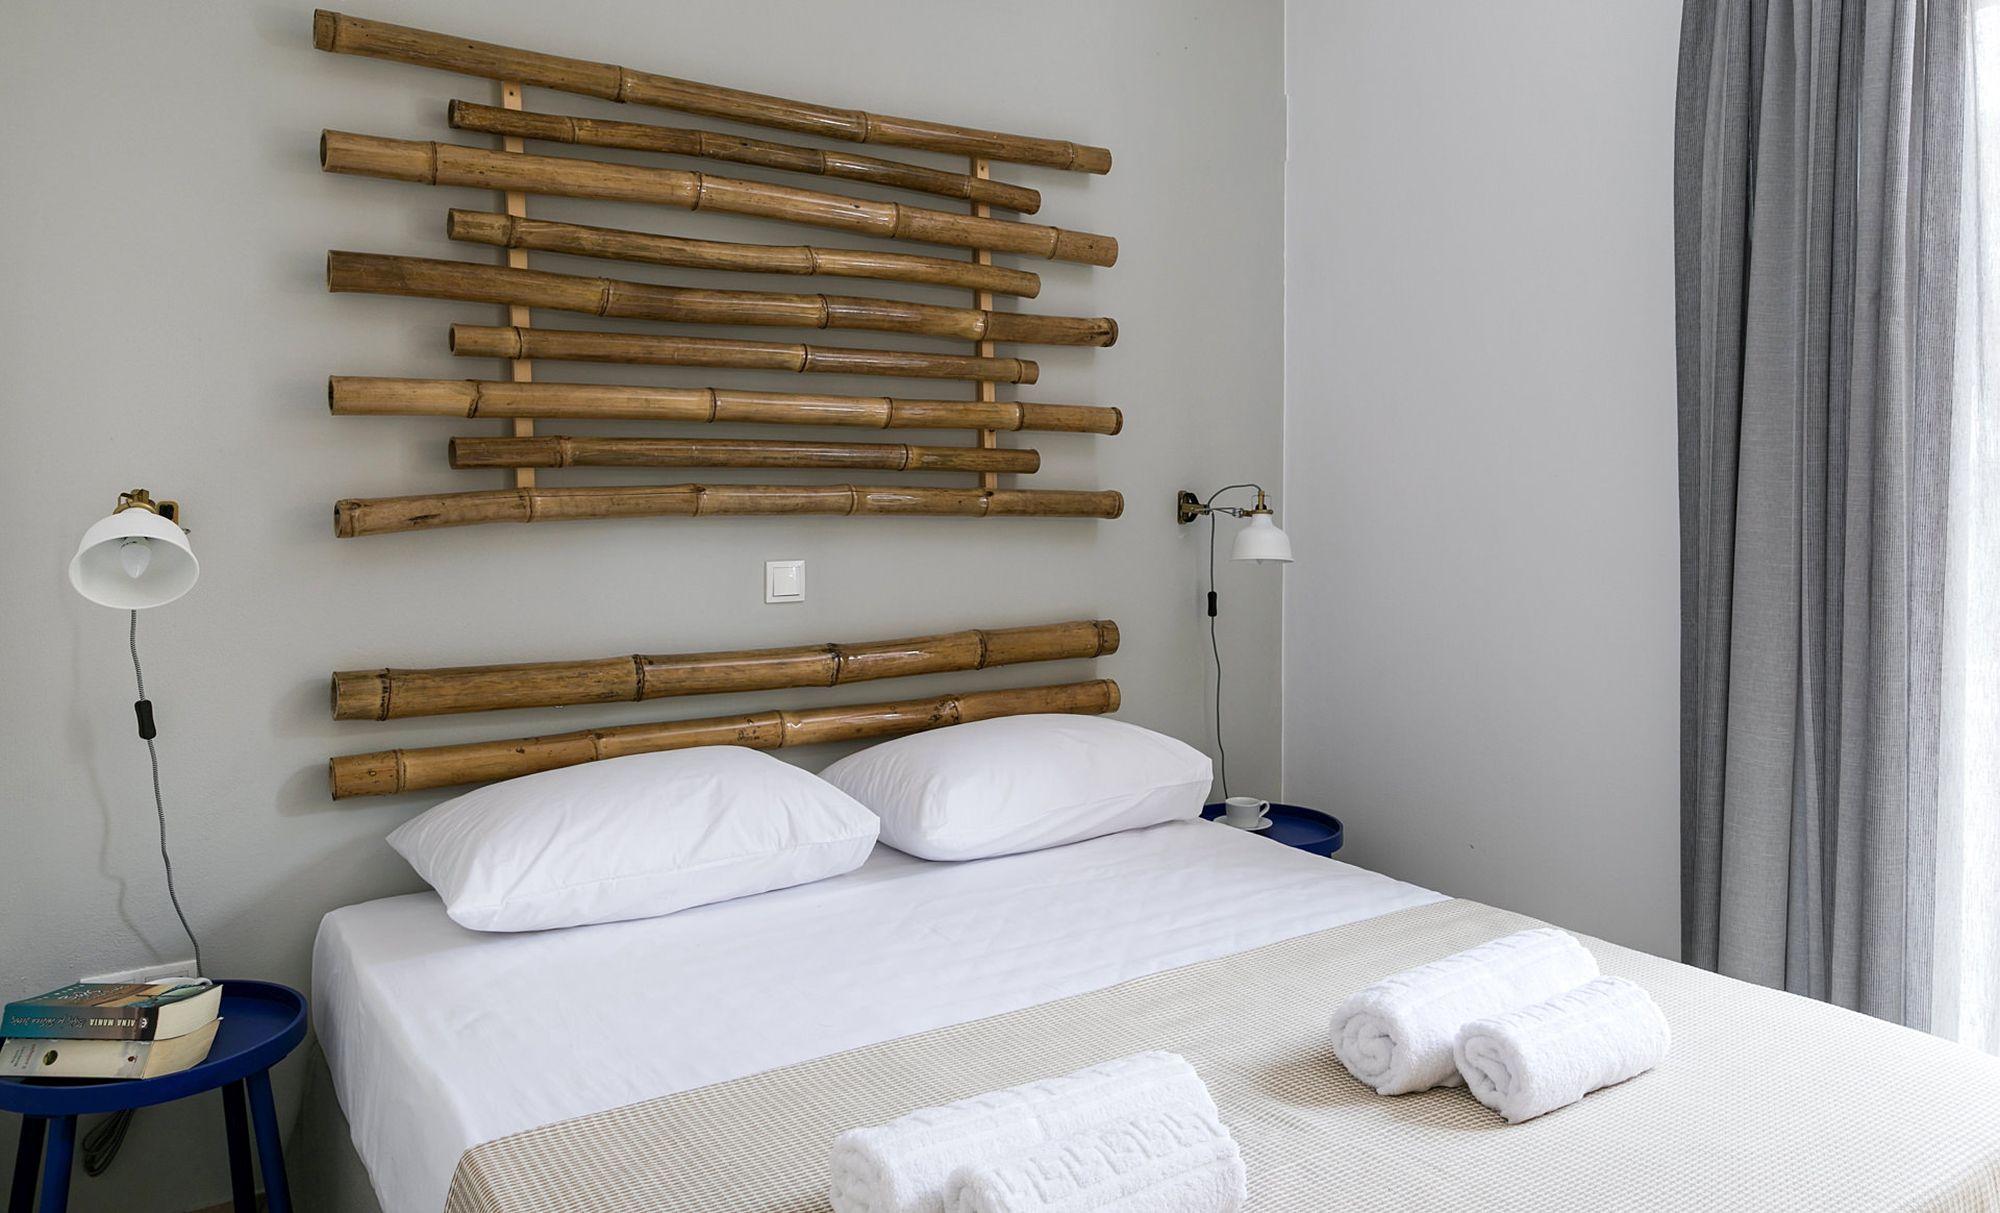 Bedroom with a double bed, two metallic blue bedside tables, modern white-gold wall lights and wooden masts on the wall.